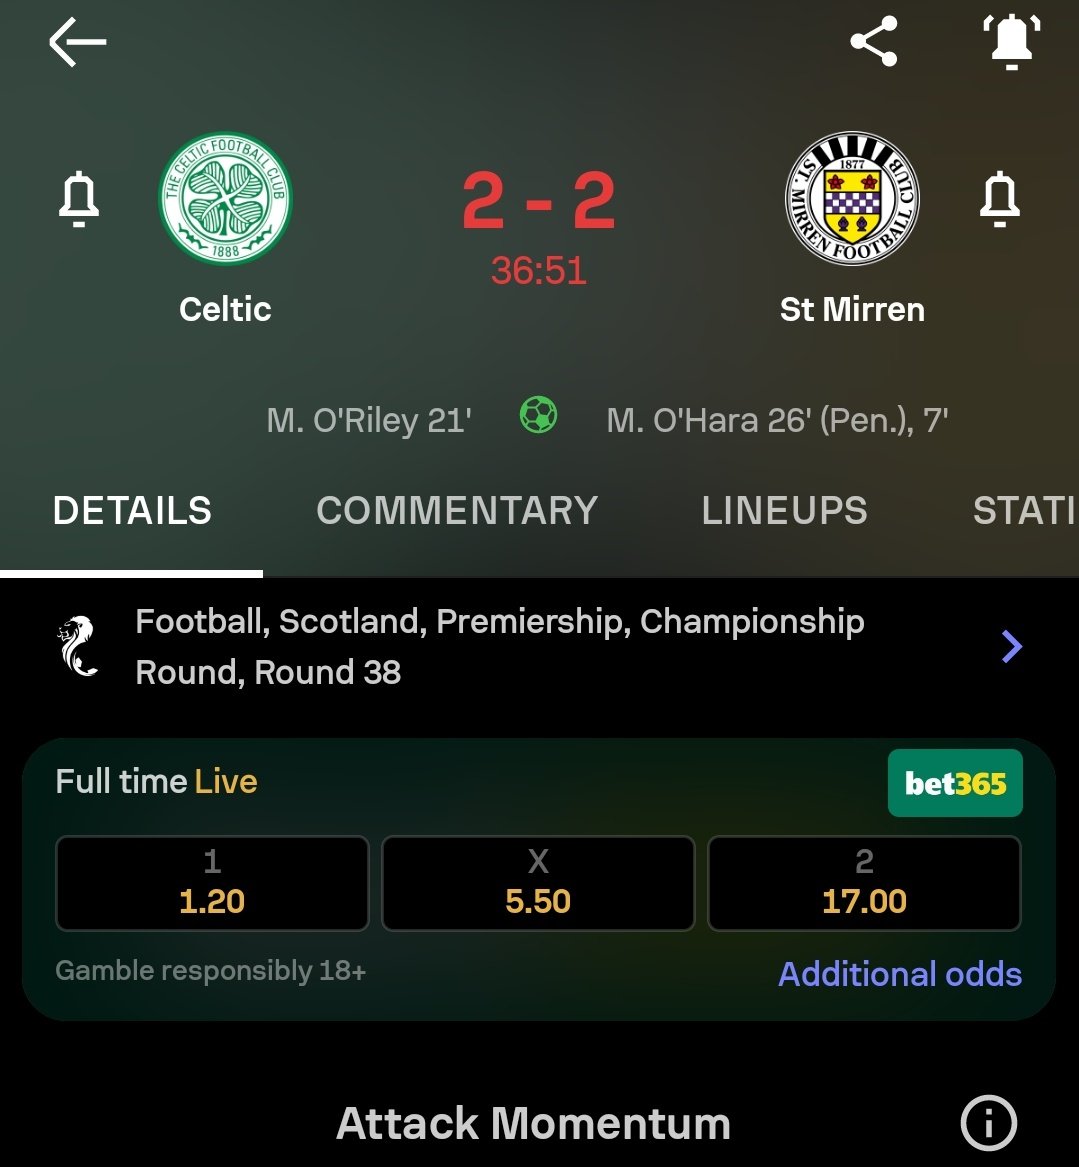 Is celtic playing  football a basketball 🏀 🤔 

Imagine I feared over 3.5  and went for a home win 😏😏